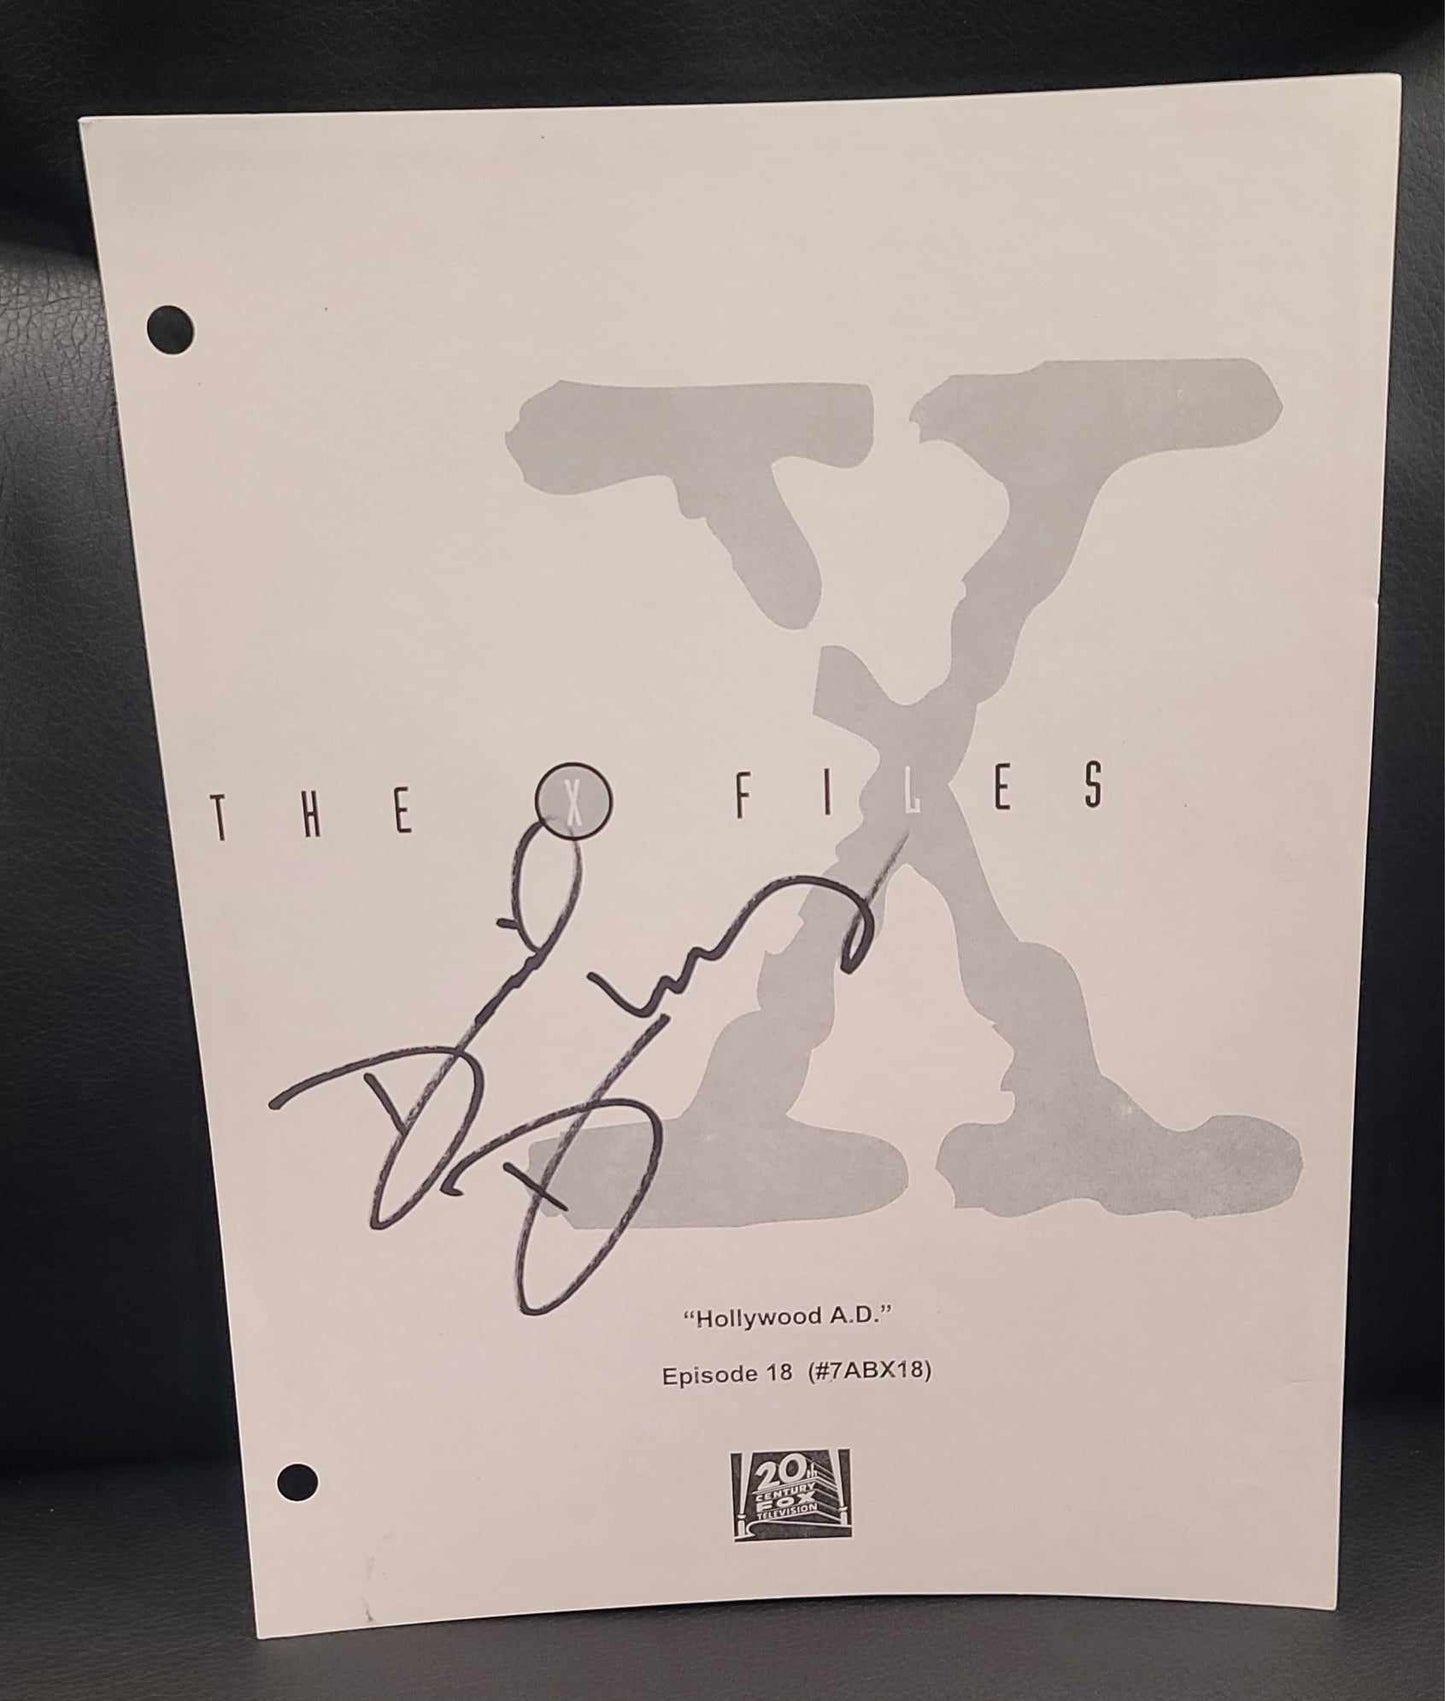 Script cover autographed by David Duchovny   - Donated by Chris Carter